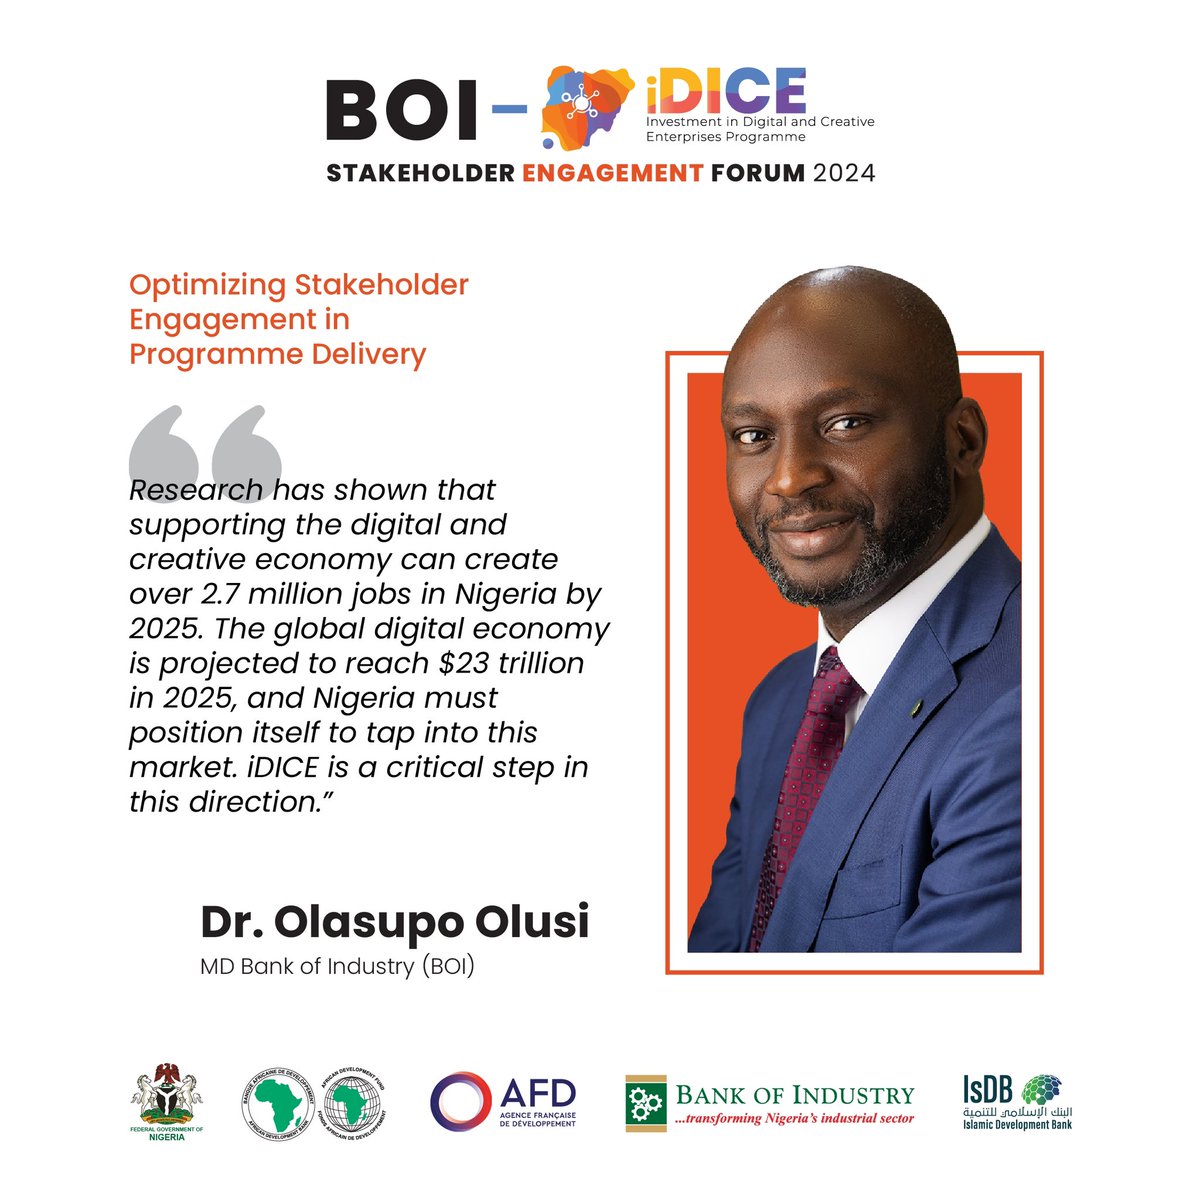 Excerpts from the #MDBOI’s welcome address at the iDICE Stakeholder Engagement Session. The Investment in Digital and Creative Enterprises Program (iDICE) is a Federal Government of Nigeria initiative promoting investment in digital and creative industries.